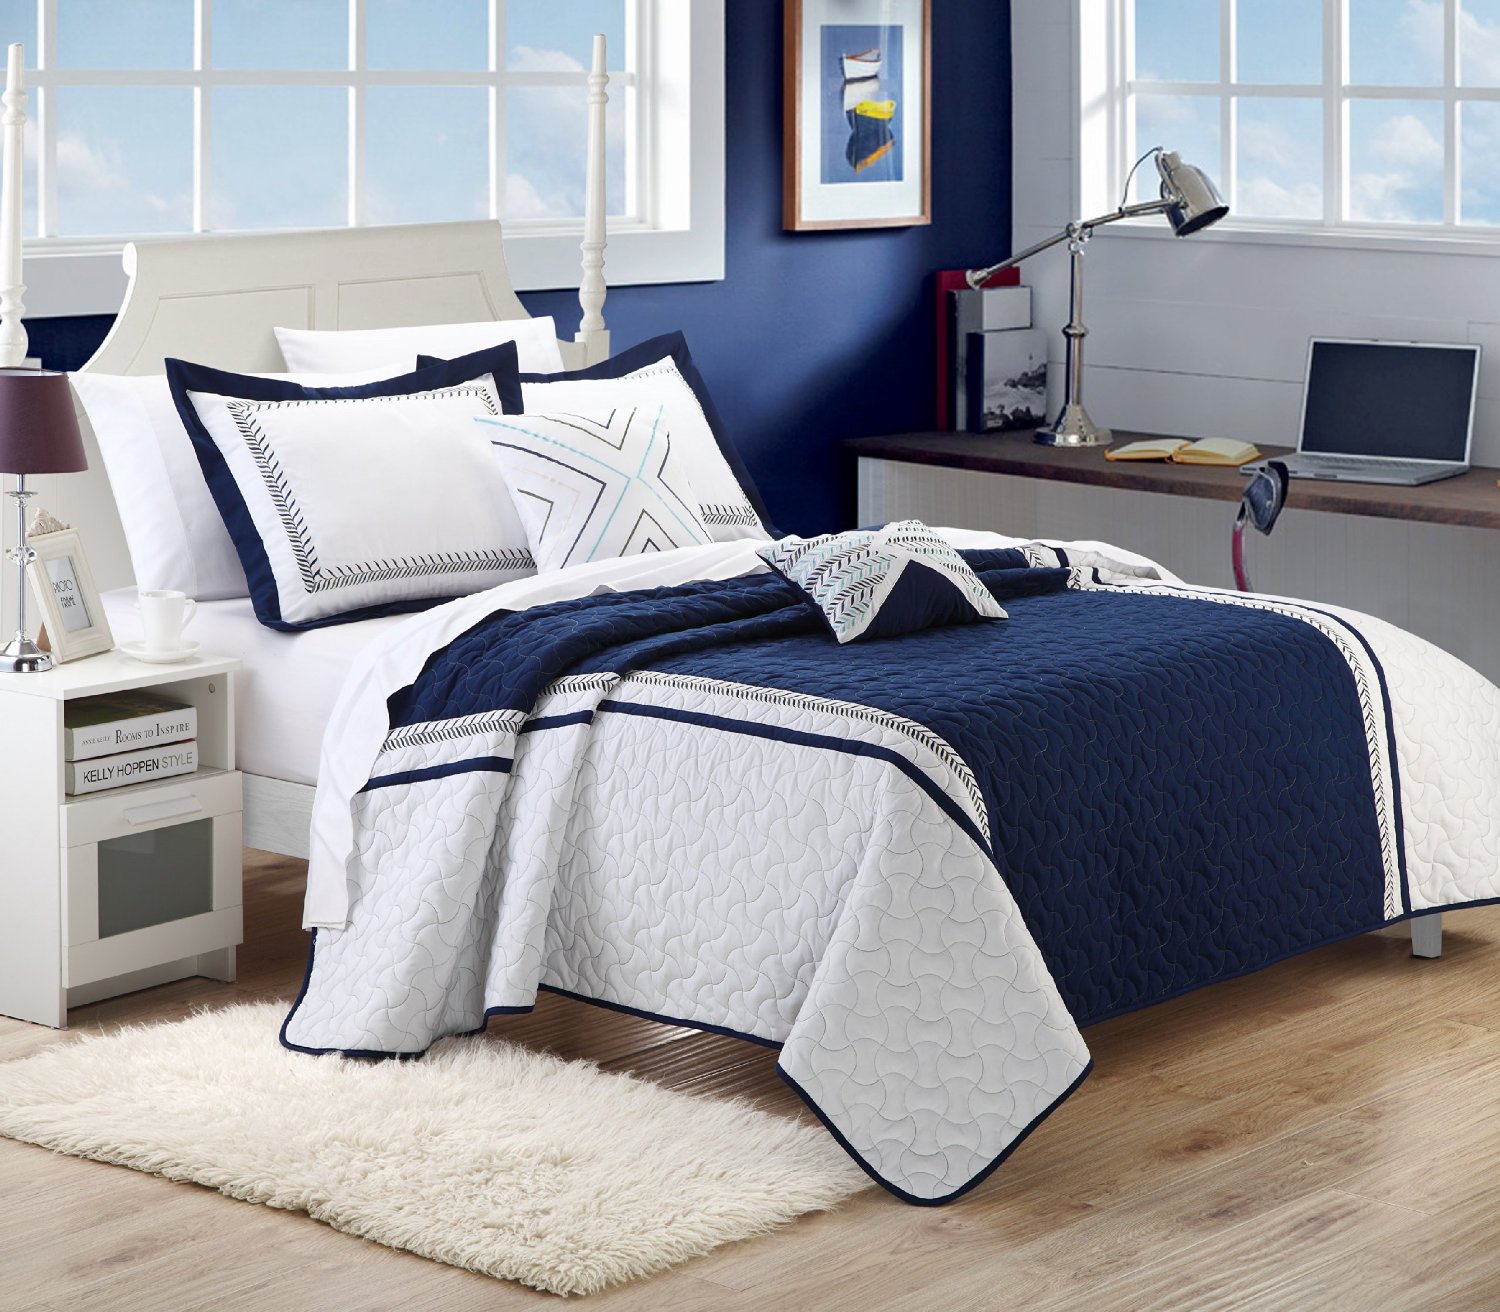 Navy Blue and White Comforter and Bedding Sets